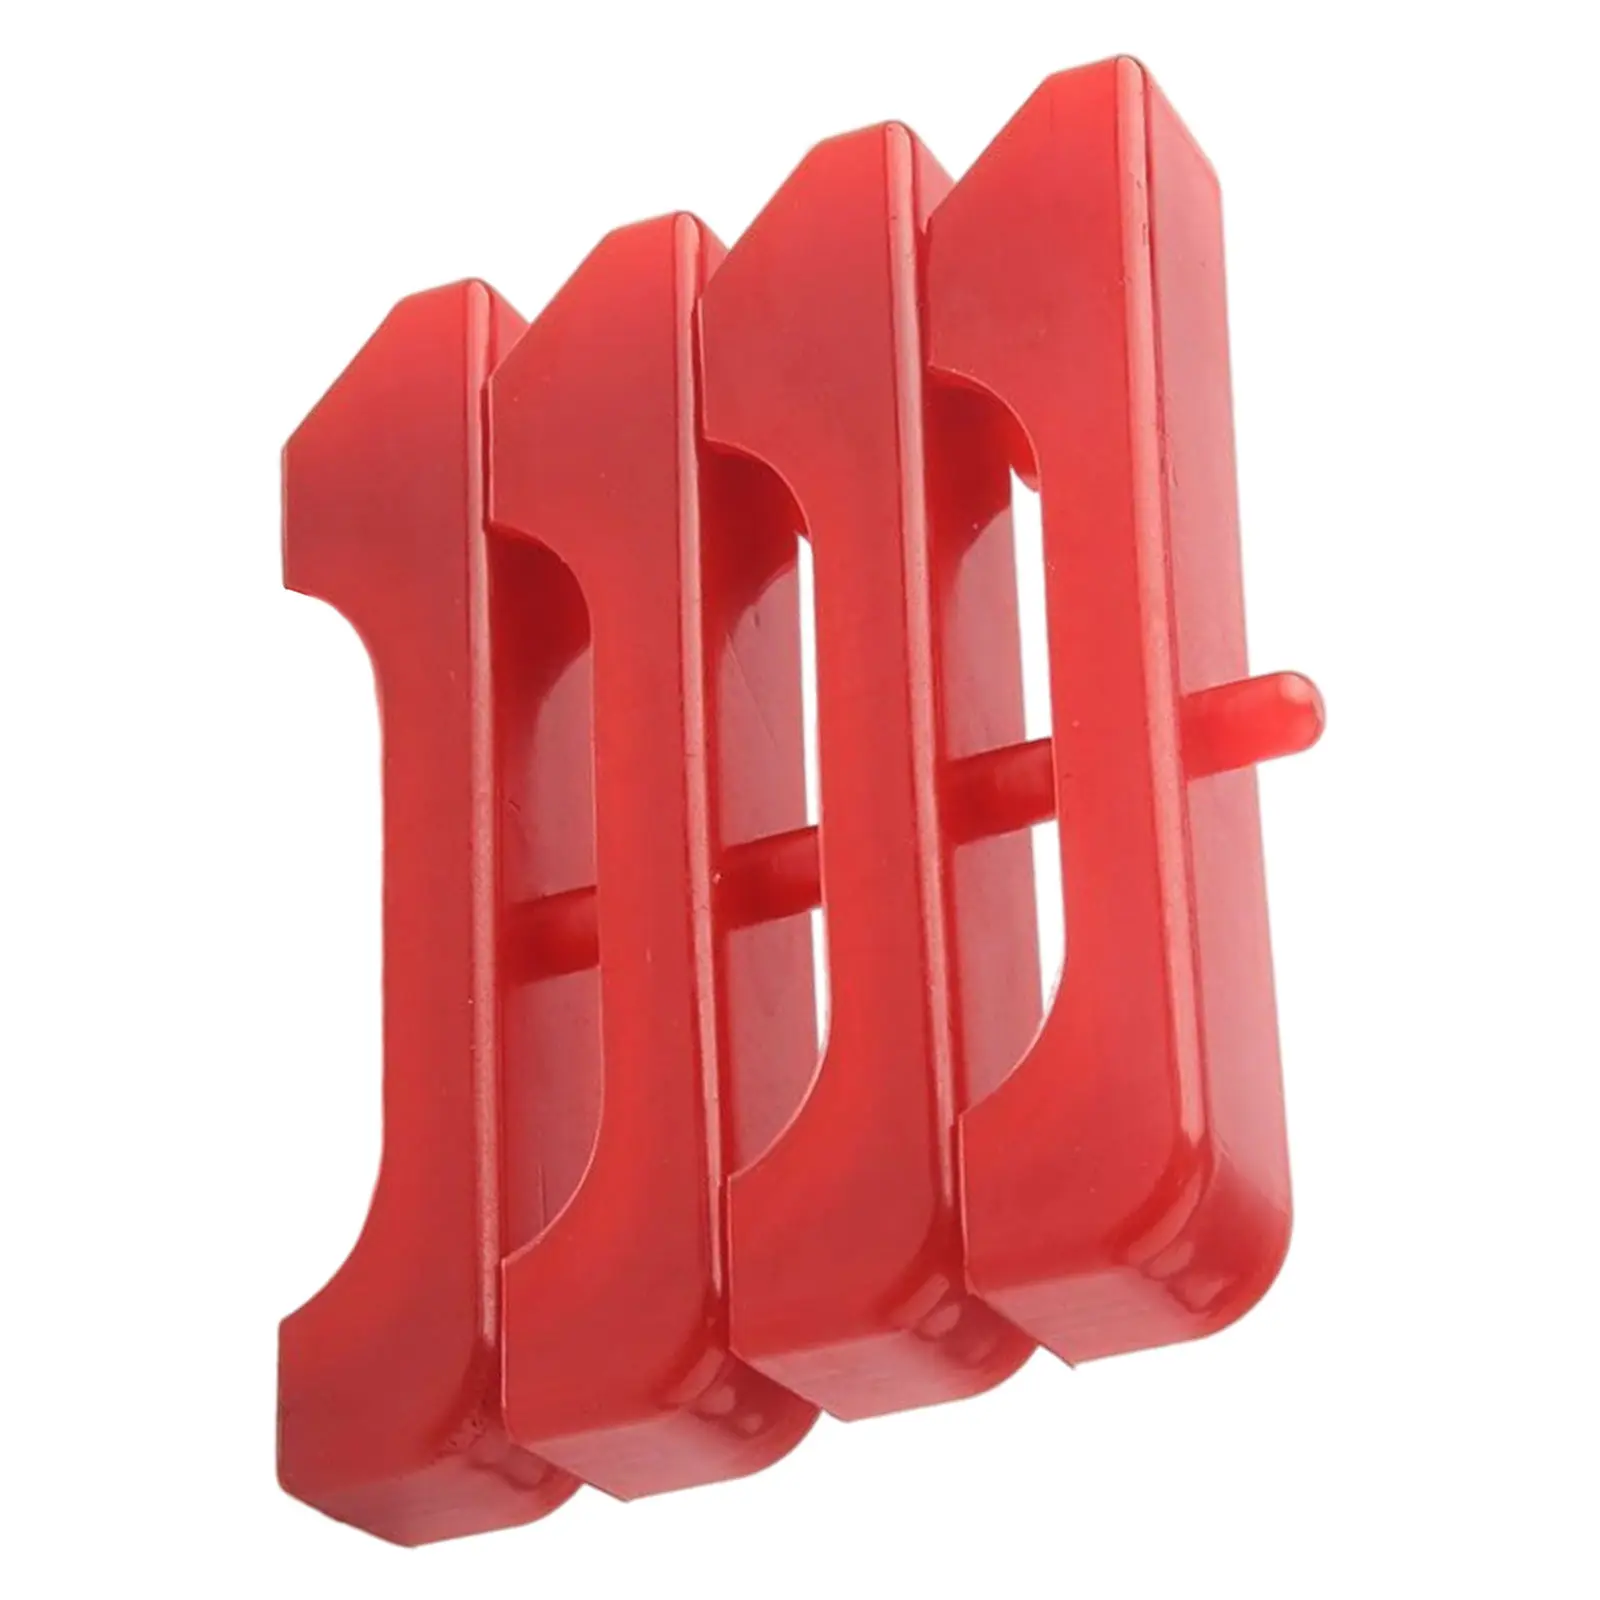 4x Auto Engine Radiator Insolators 7-1711 Direct Replacement Portable Accessory Red Urethane Fits for General Motor Vehicle